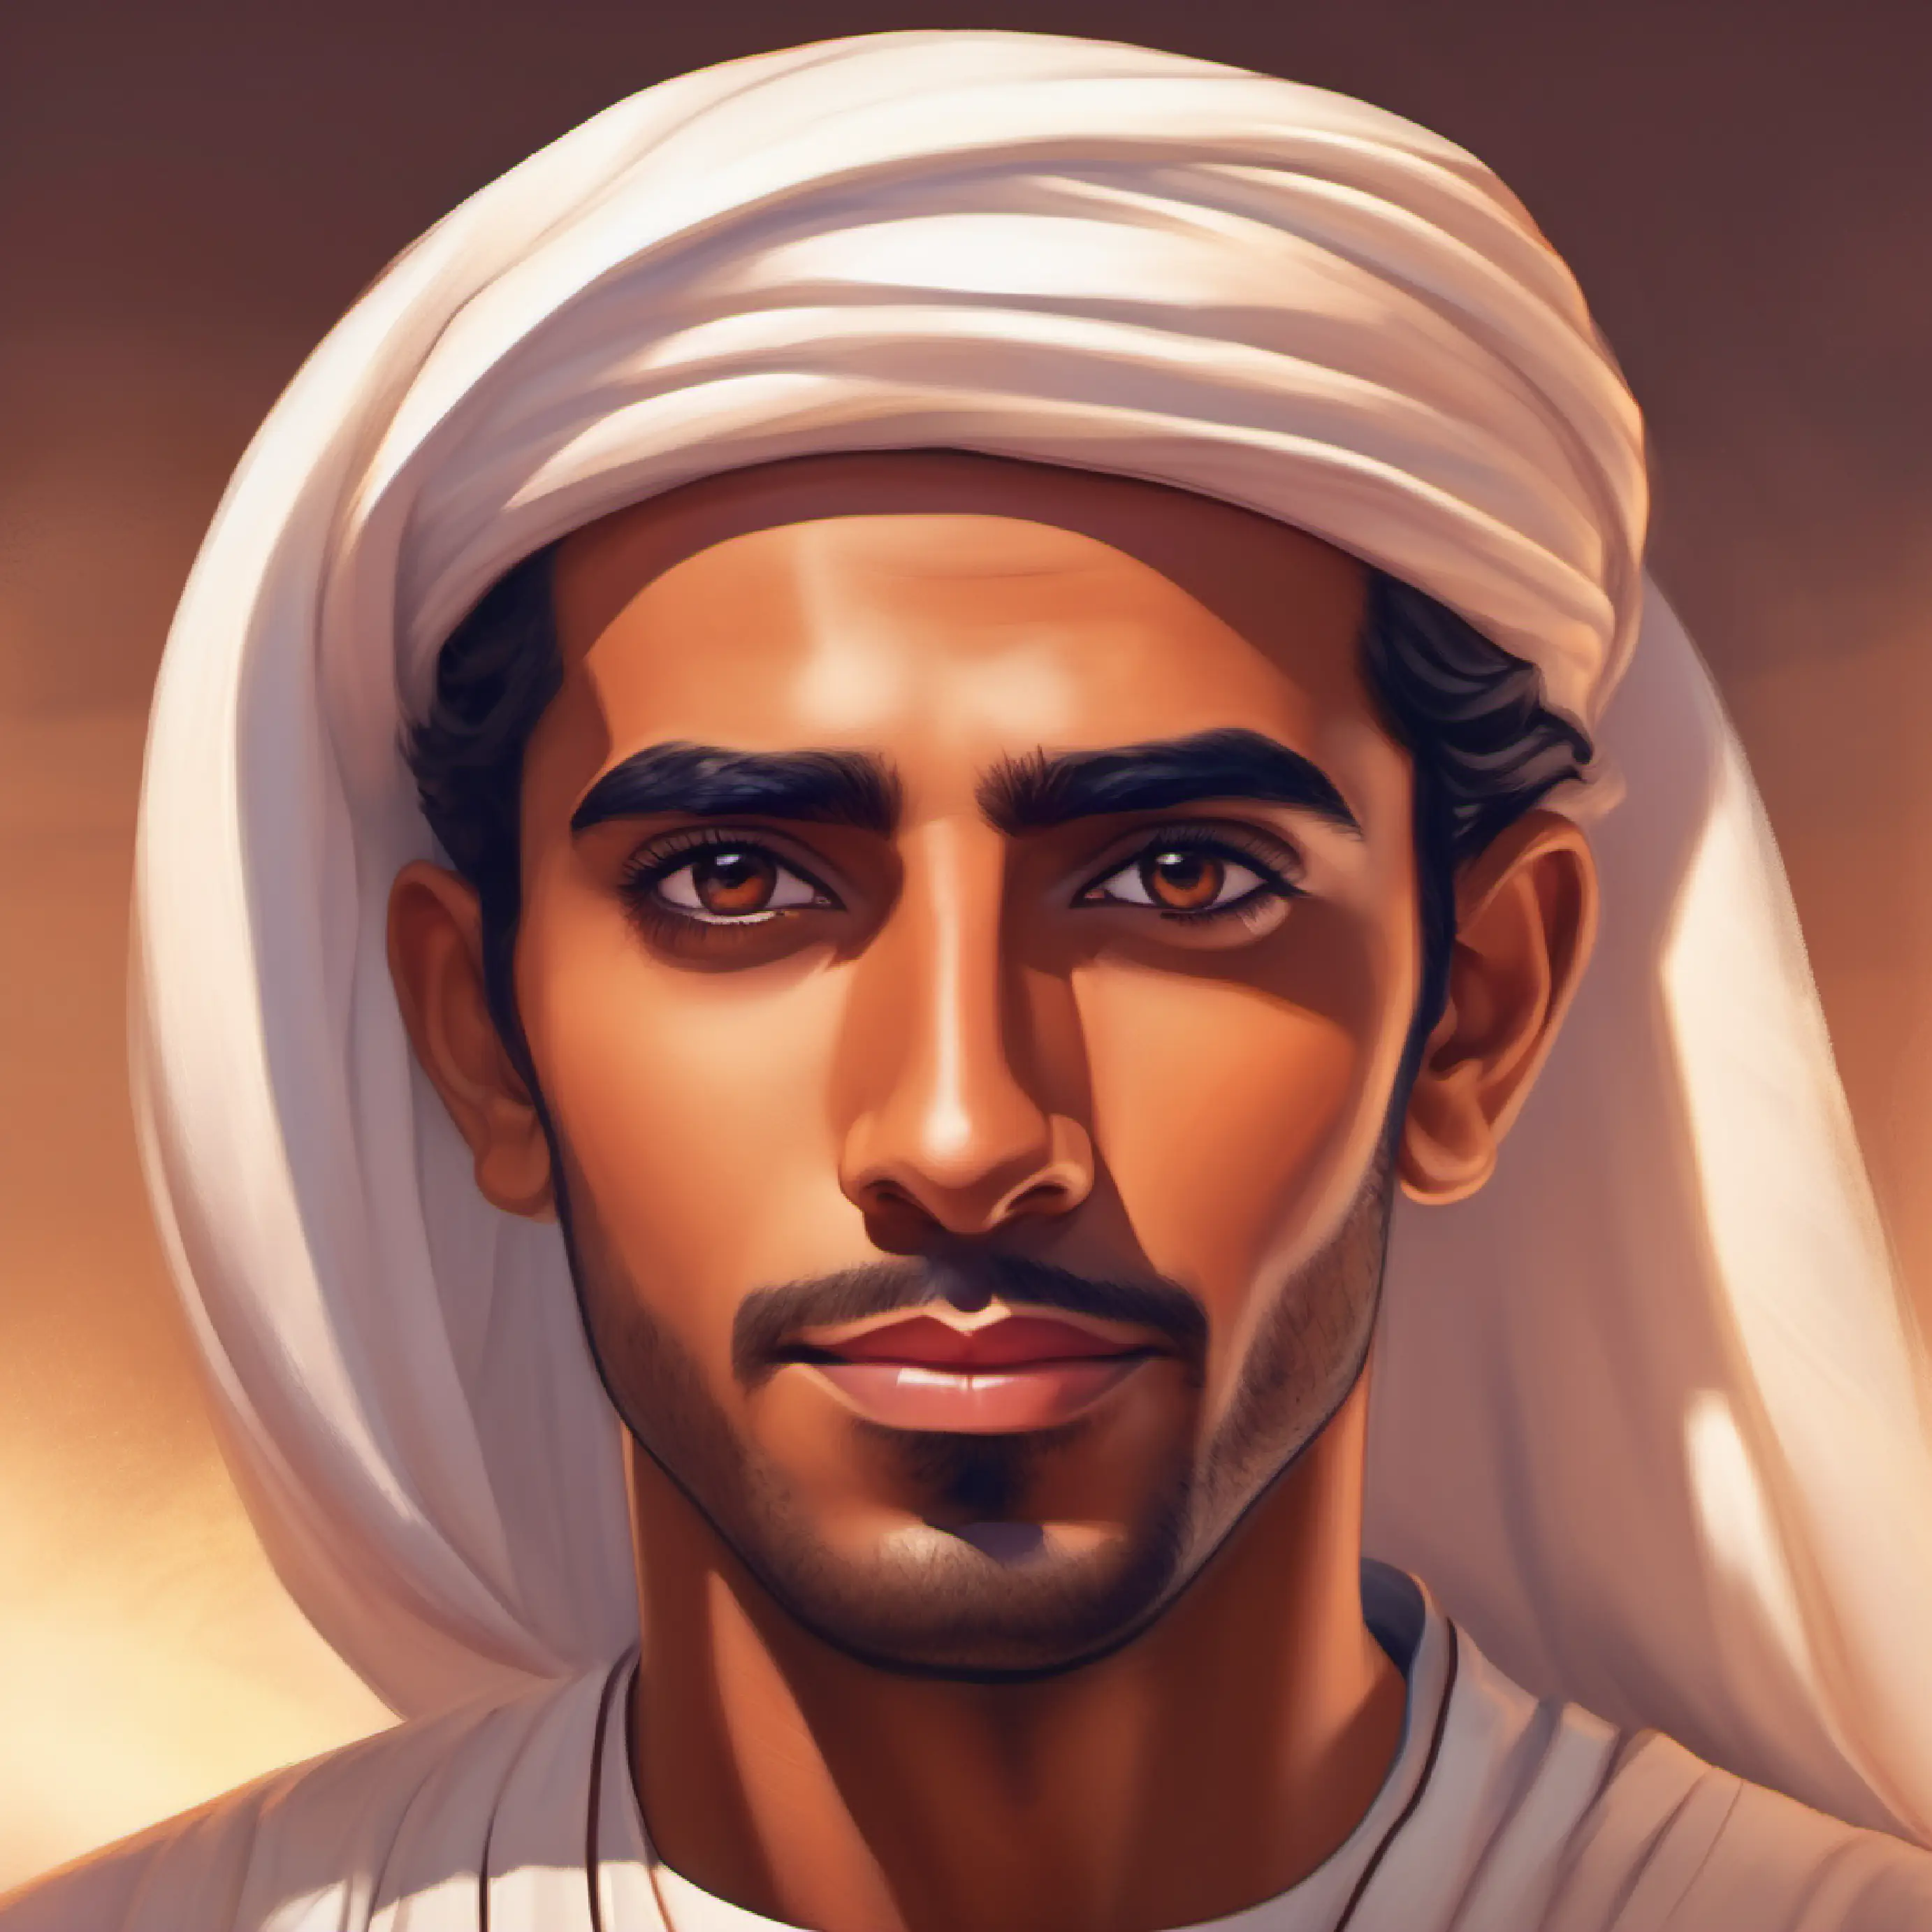 Young Emirati man, bronze skin, earnest dark eyes, with a scientific gaze facing various challenges in his project.